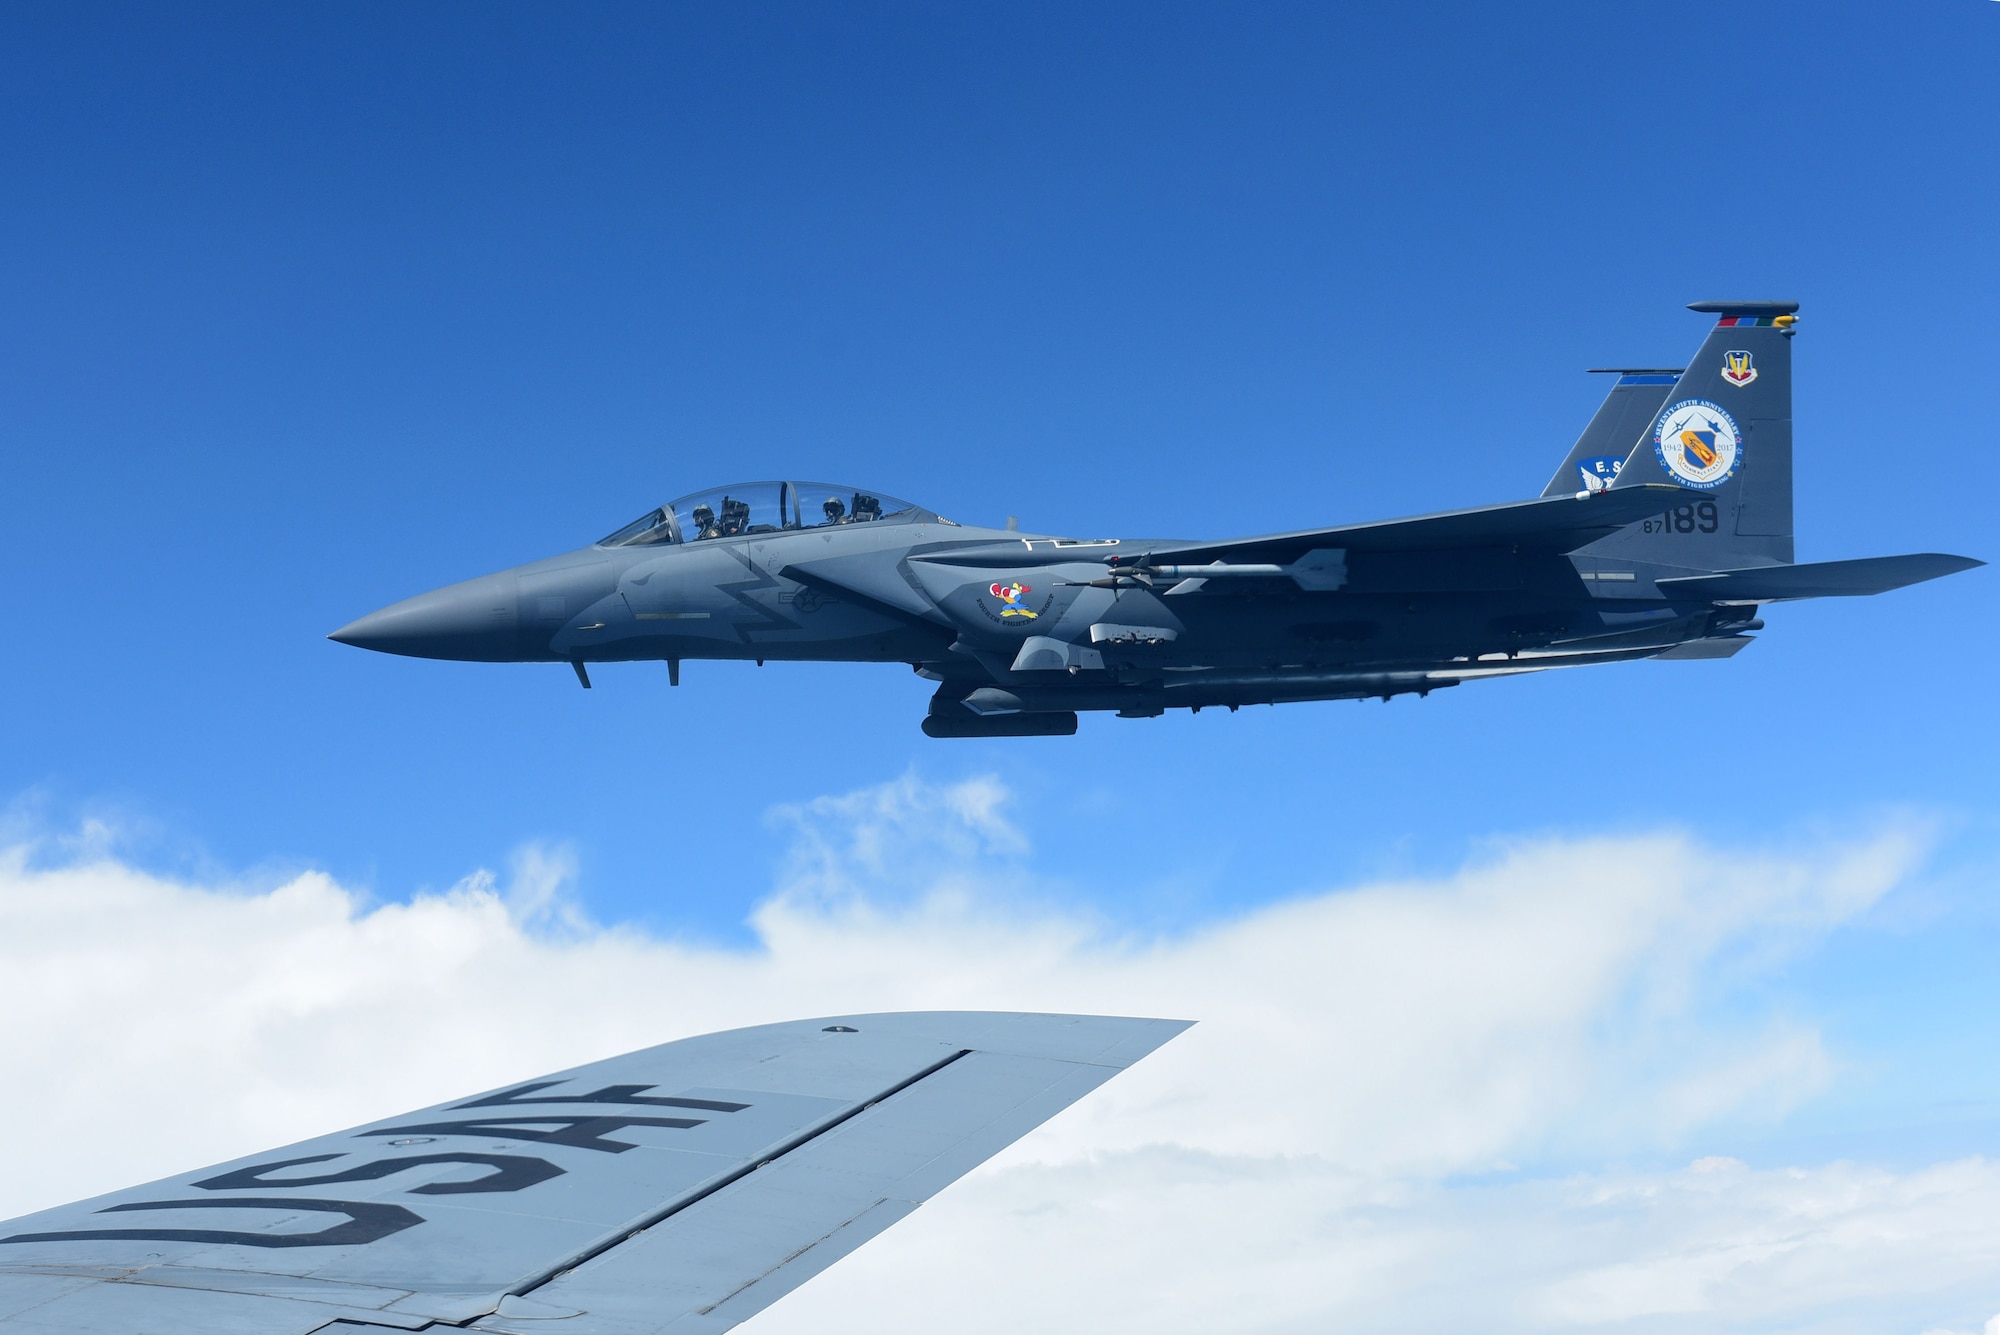 A 4th Fighter Wing F-15E Strike Eagle heritage paint scheme aircraft flies next to a KC-135R Stratotanker, Sept. 14, 2017, in the skies above the North Carolina coastline.